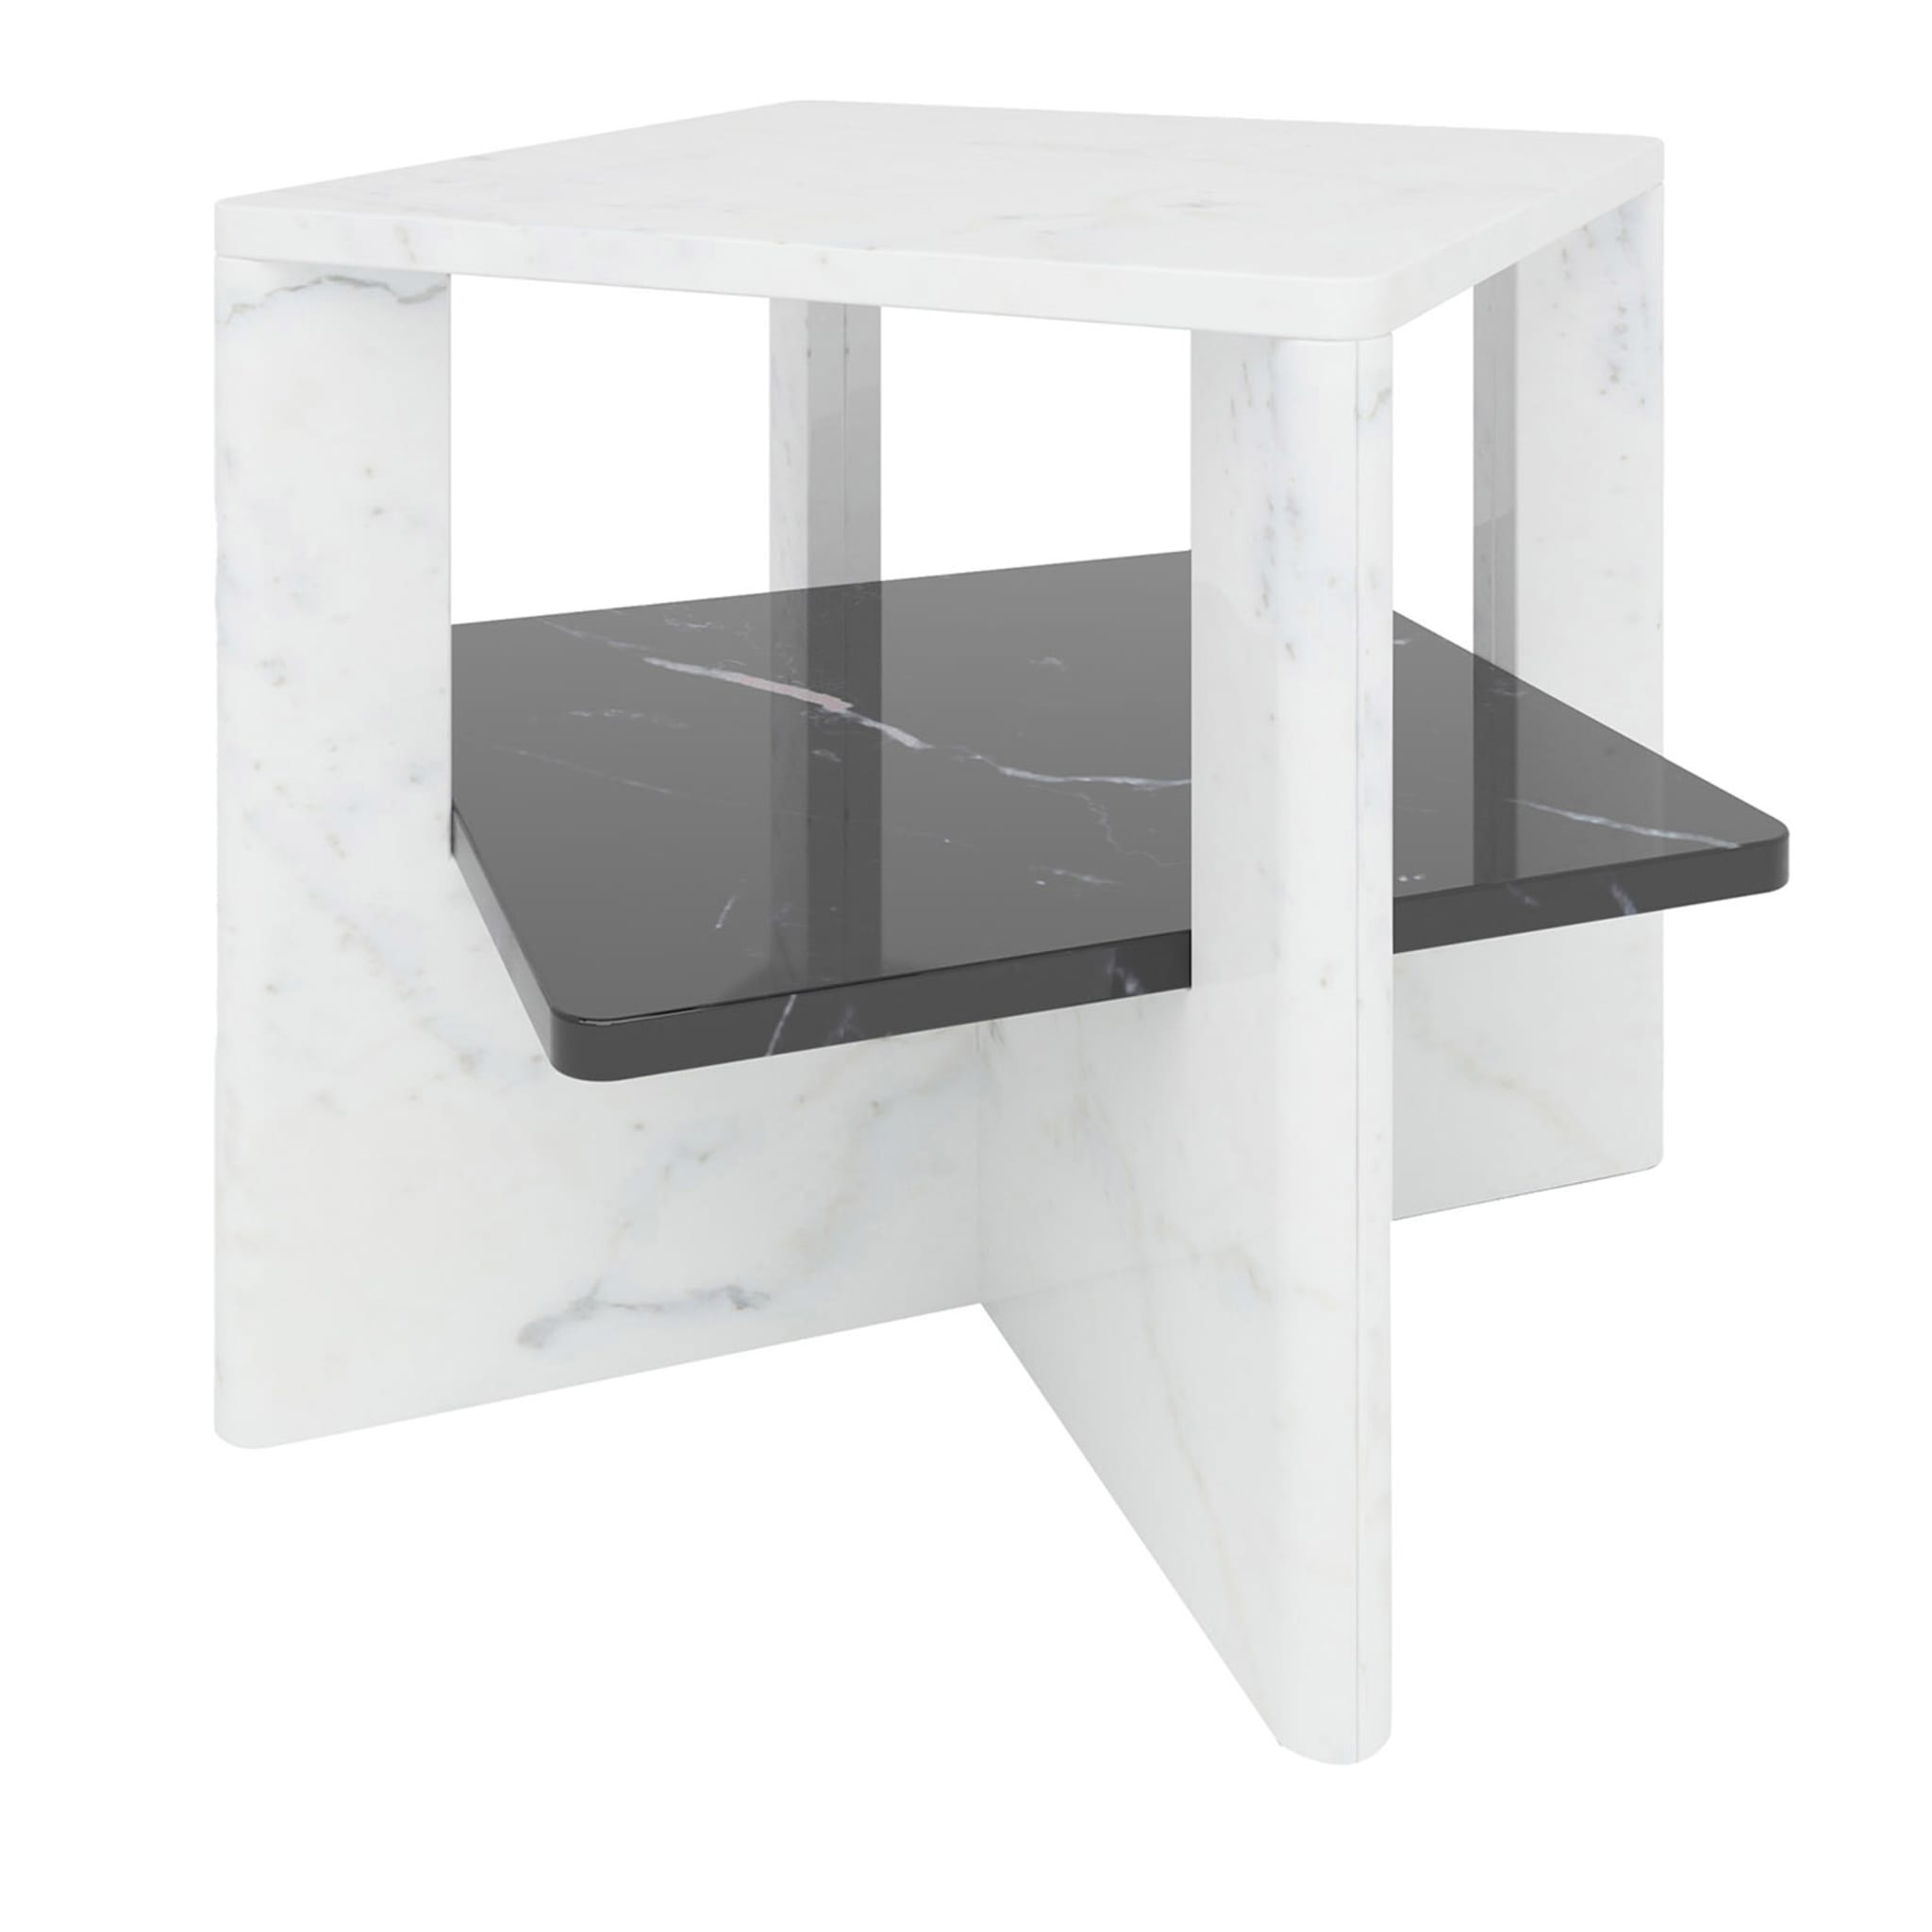 Plus+Double Marble Coffee Table #2 - Main view